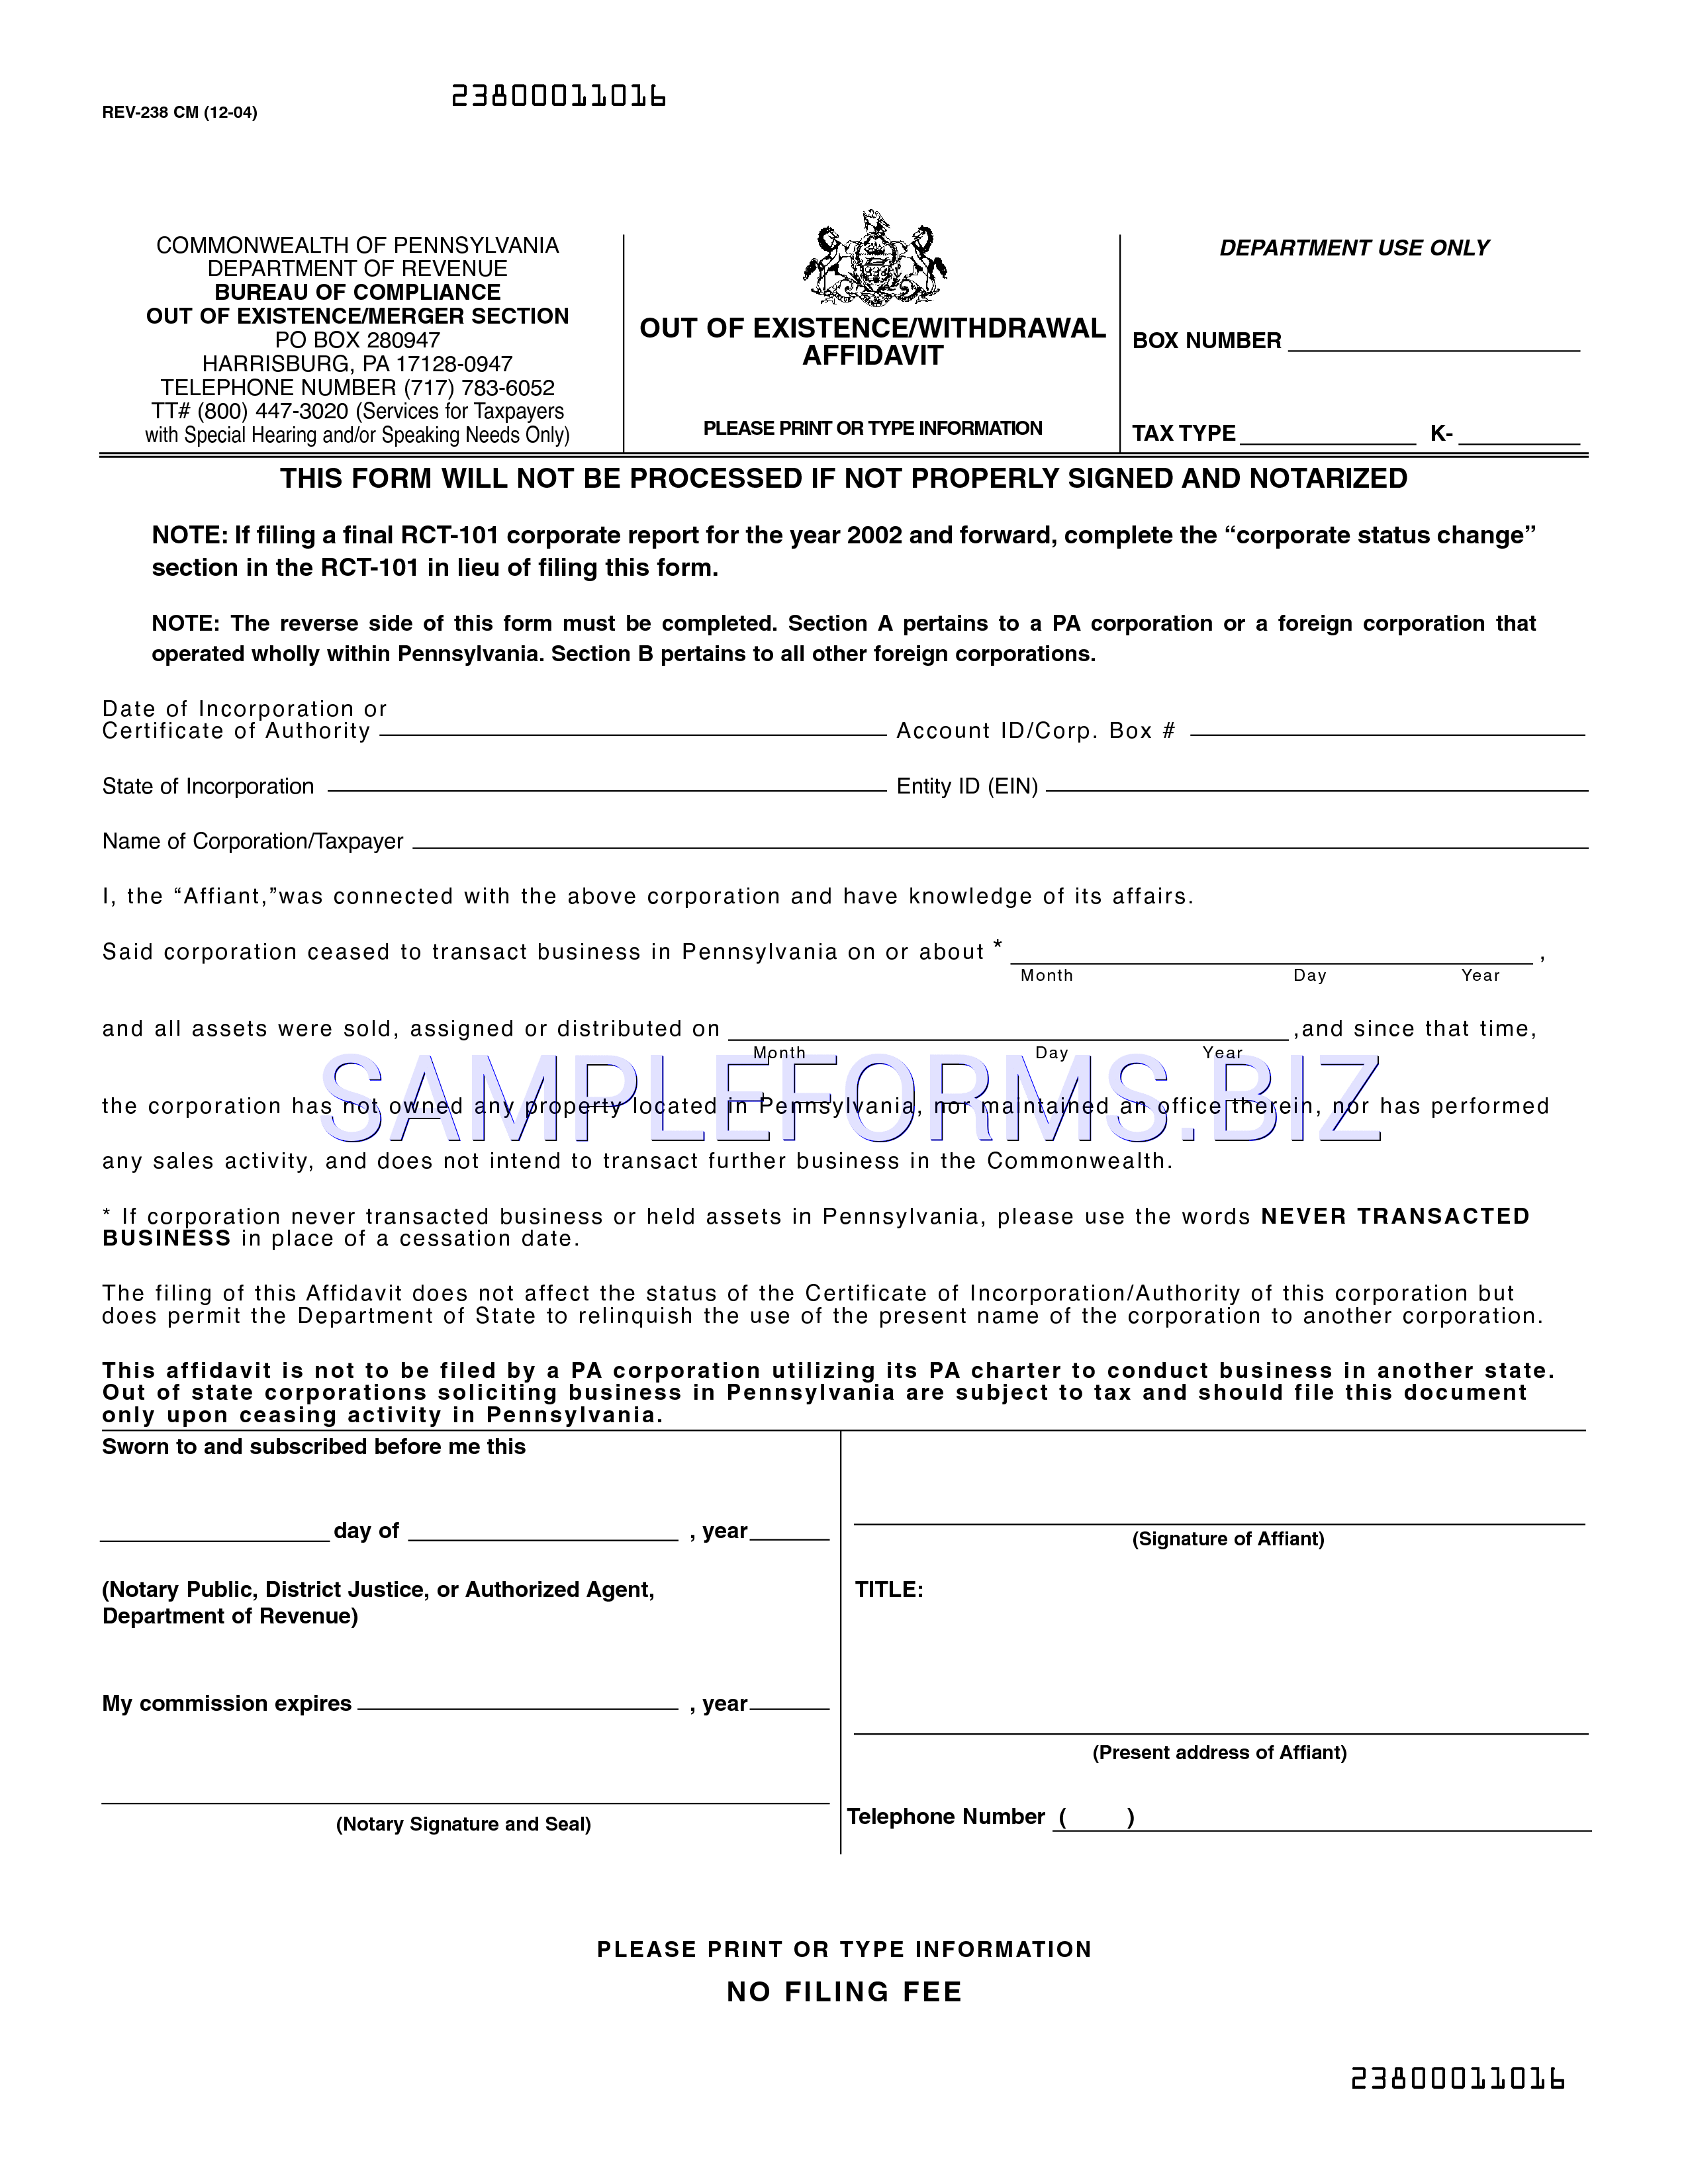 Preview free downloadable Pennsylvania Out of Existence/Withdrawal Affidavit in PDF (page 1)